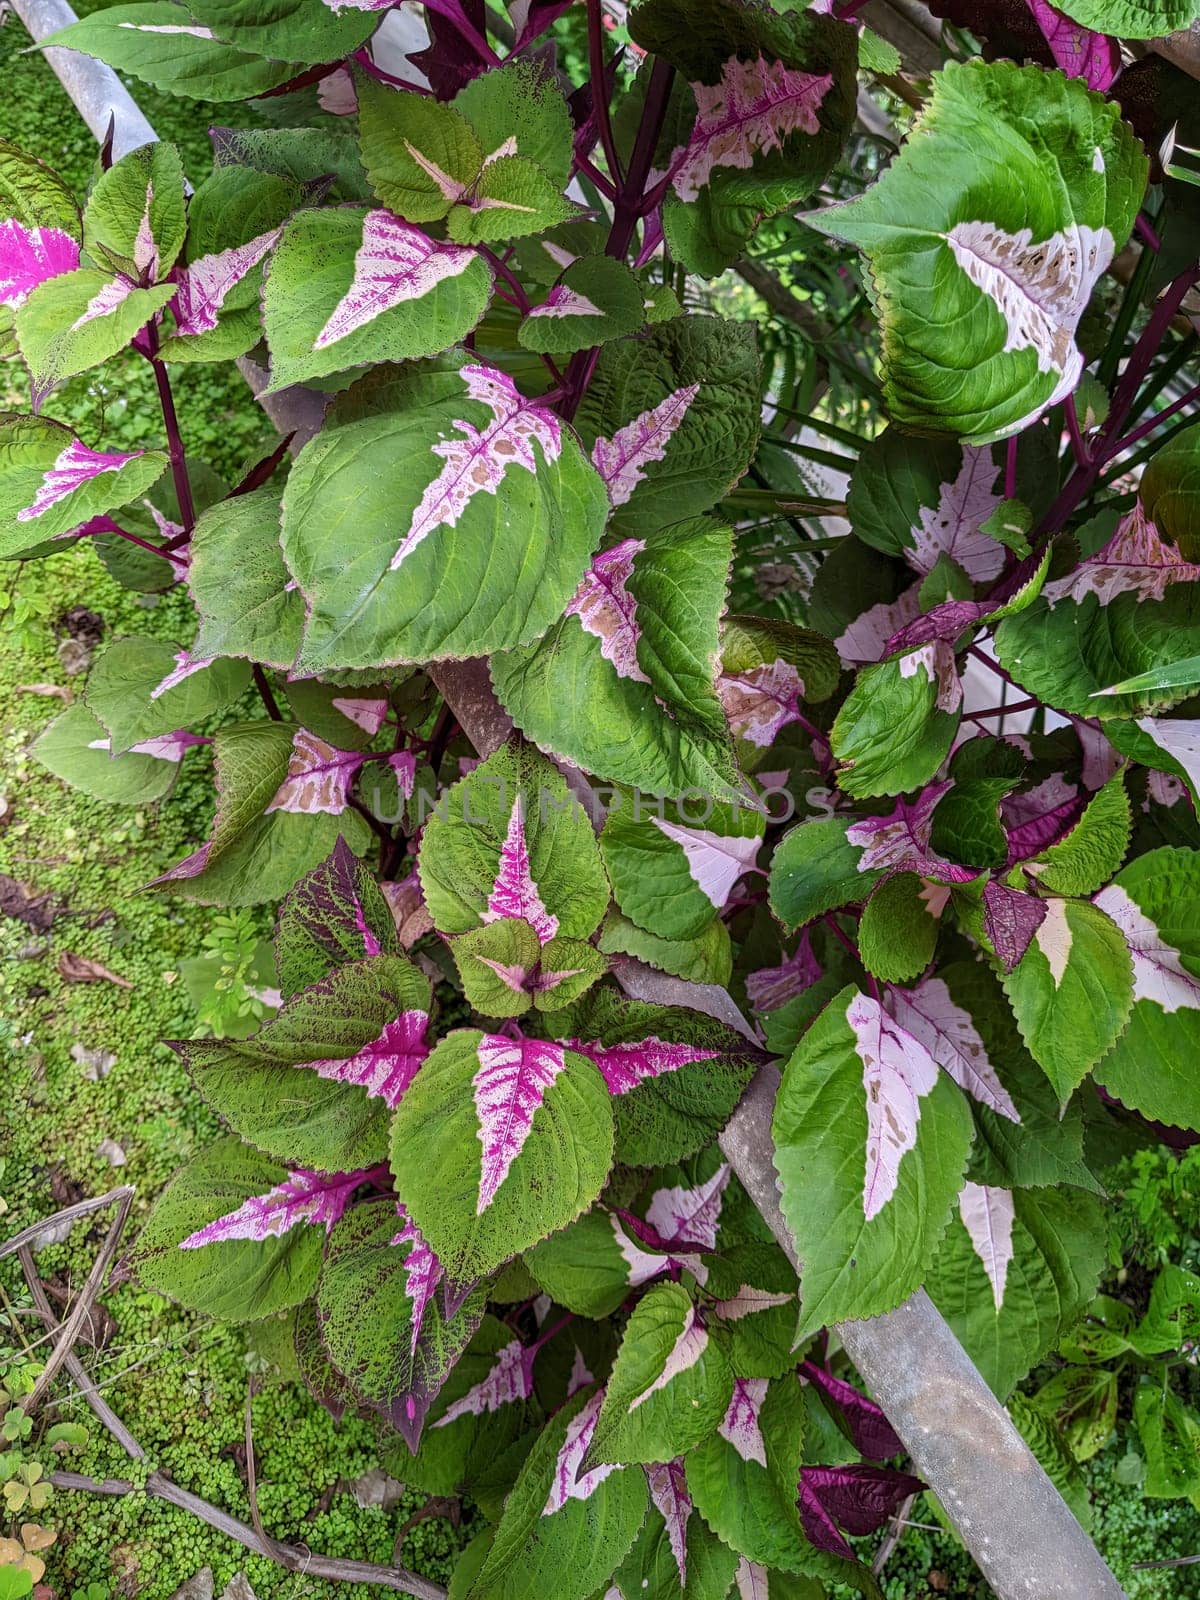 Vibrant Coleus plants flourish in a Muncie, Indiana garden, displaying a stunning mix of green, white, and purple foliage.